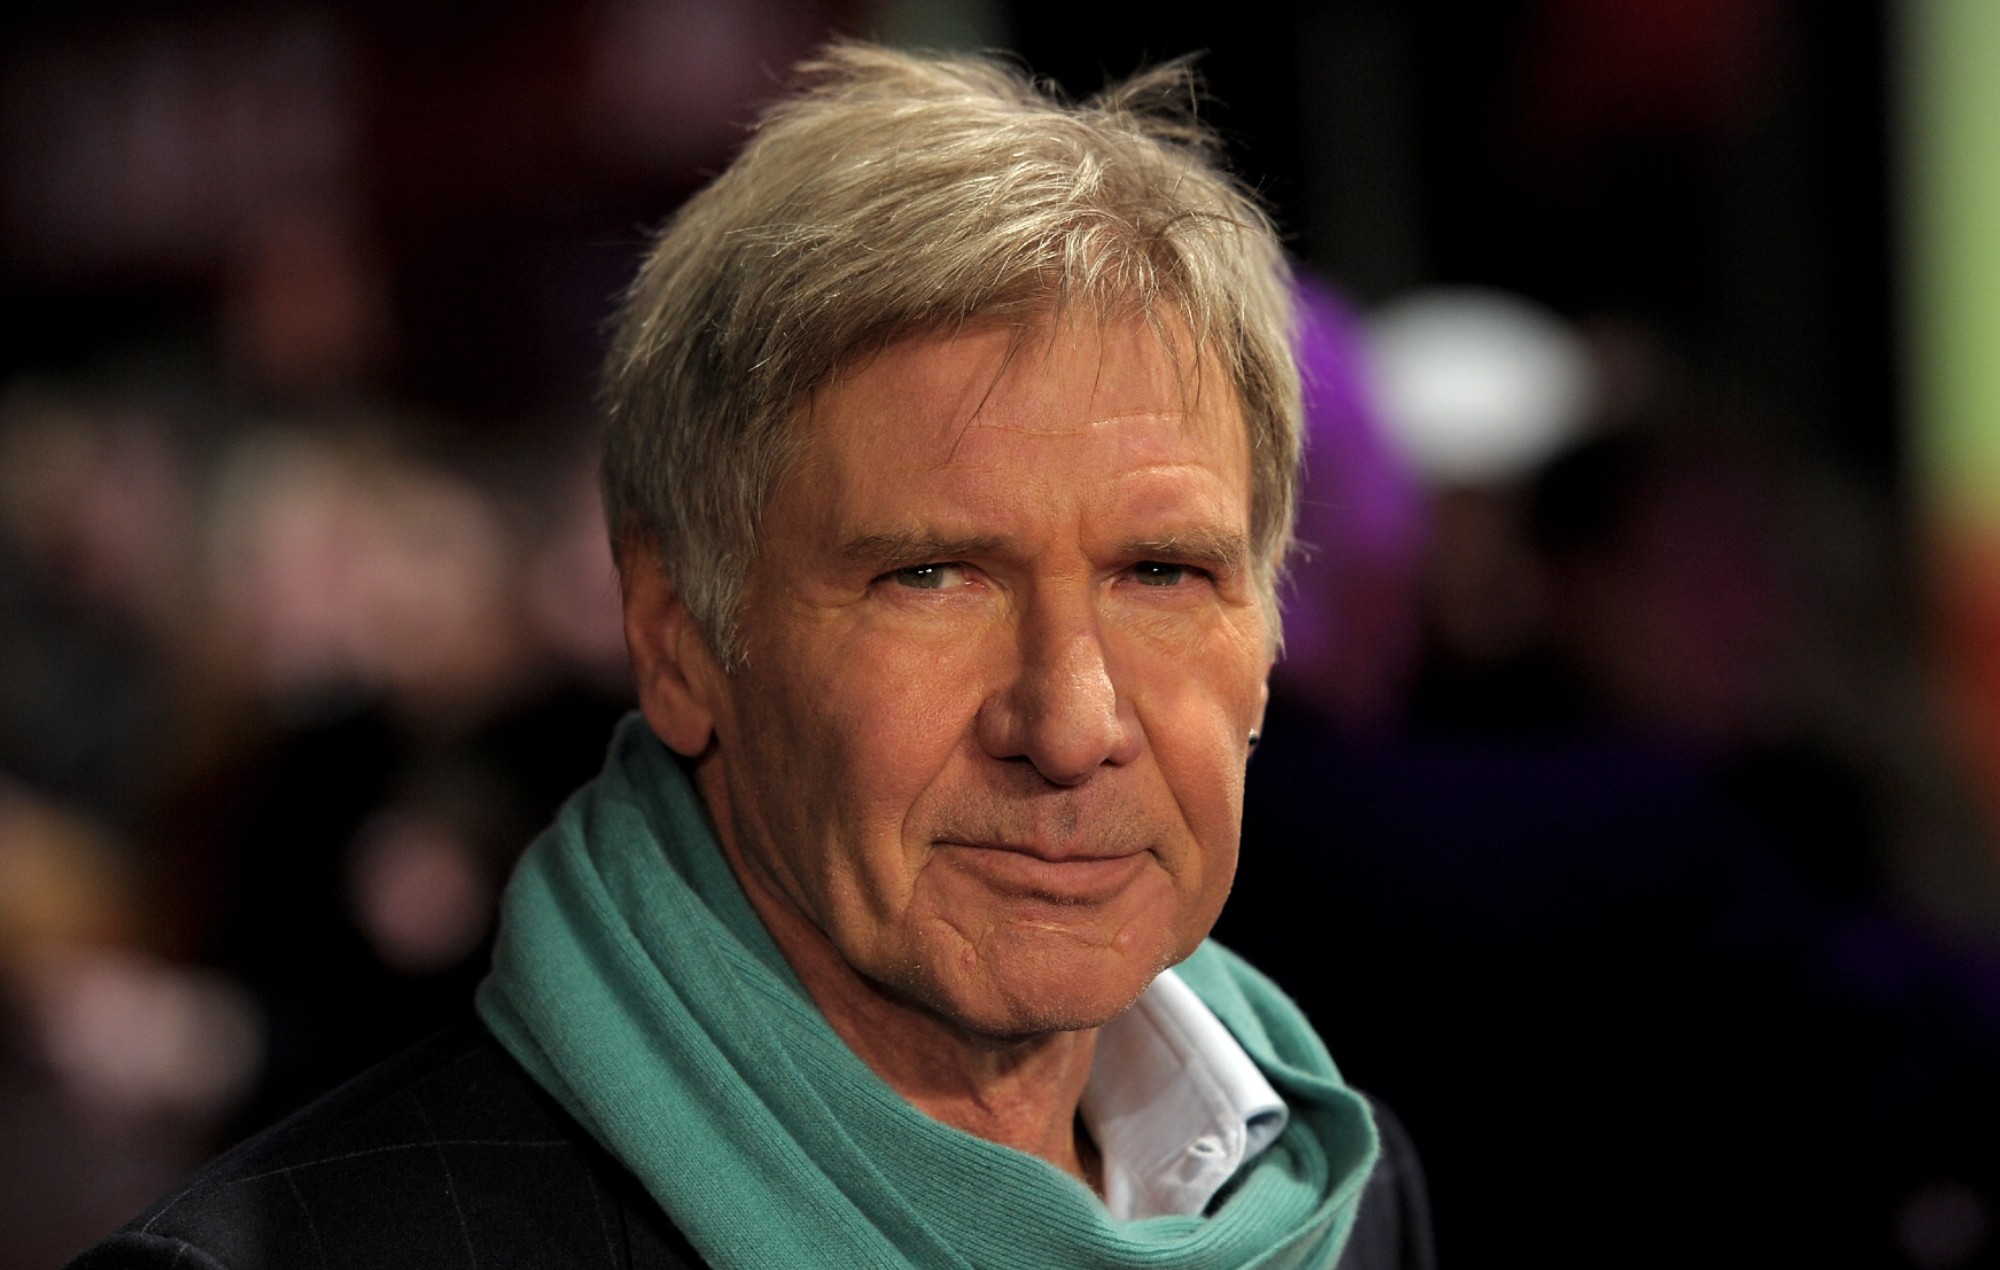 Harrison Ford Recalls Rescuing Hiker Stuck in Helicopter: ‘She Puked on My Cowboy Hat’